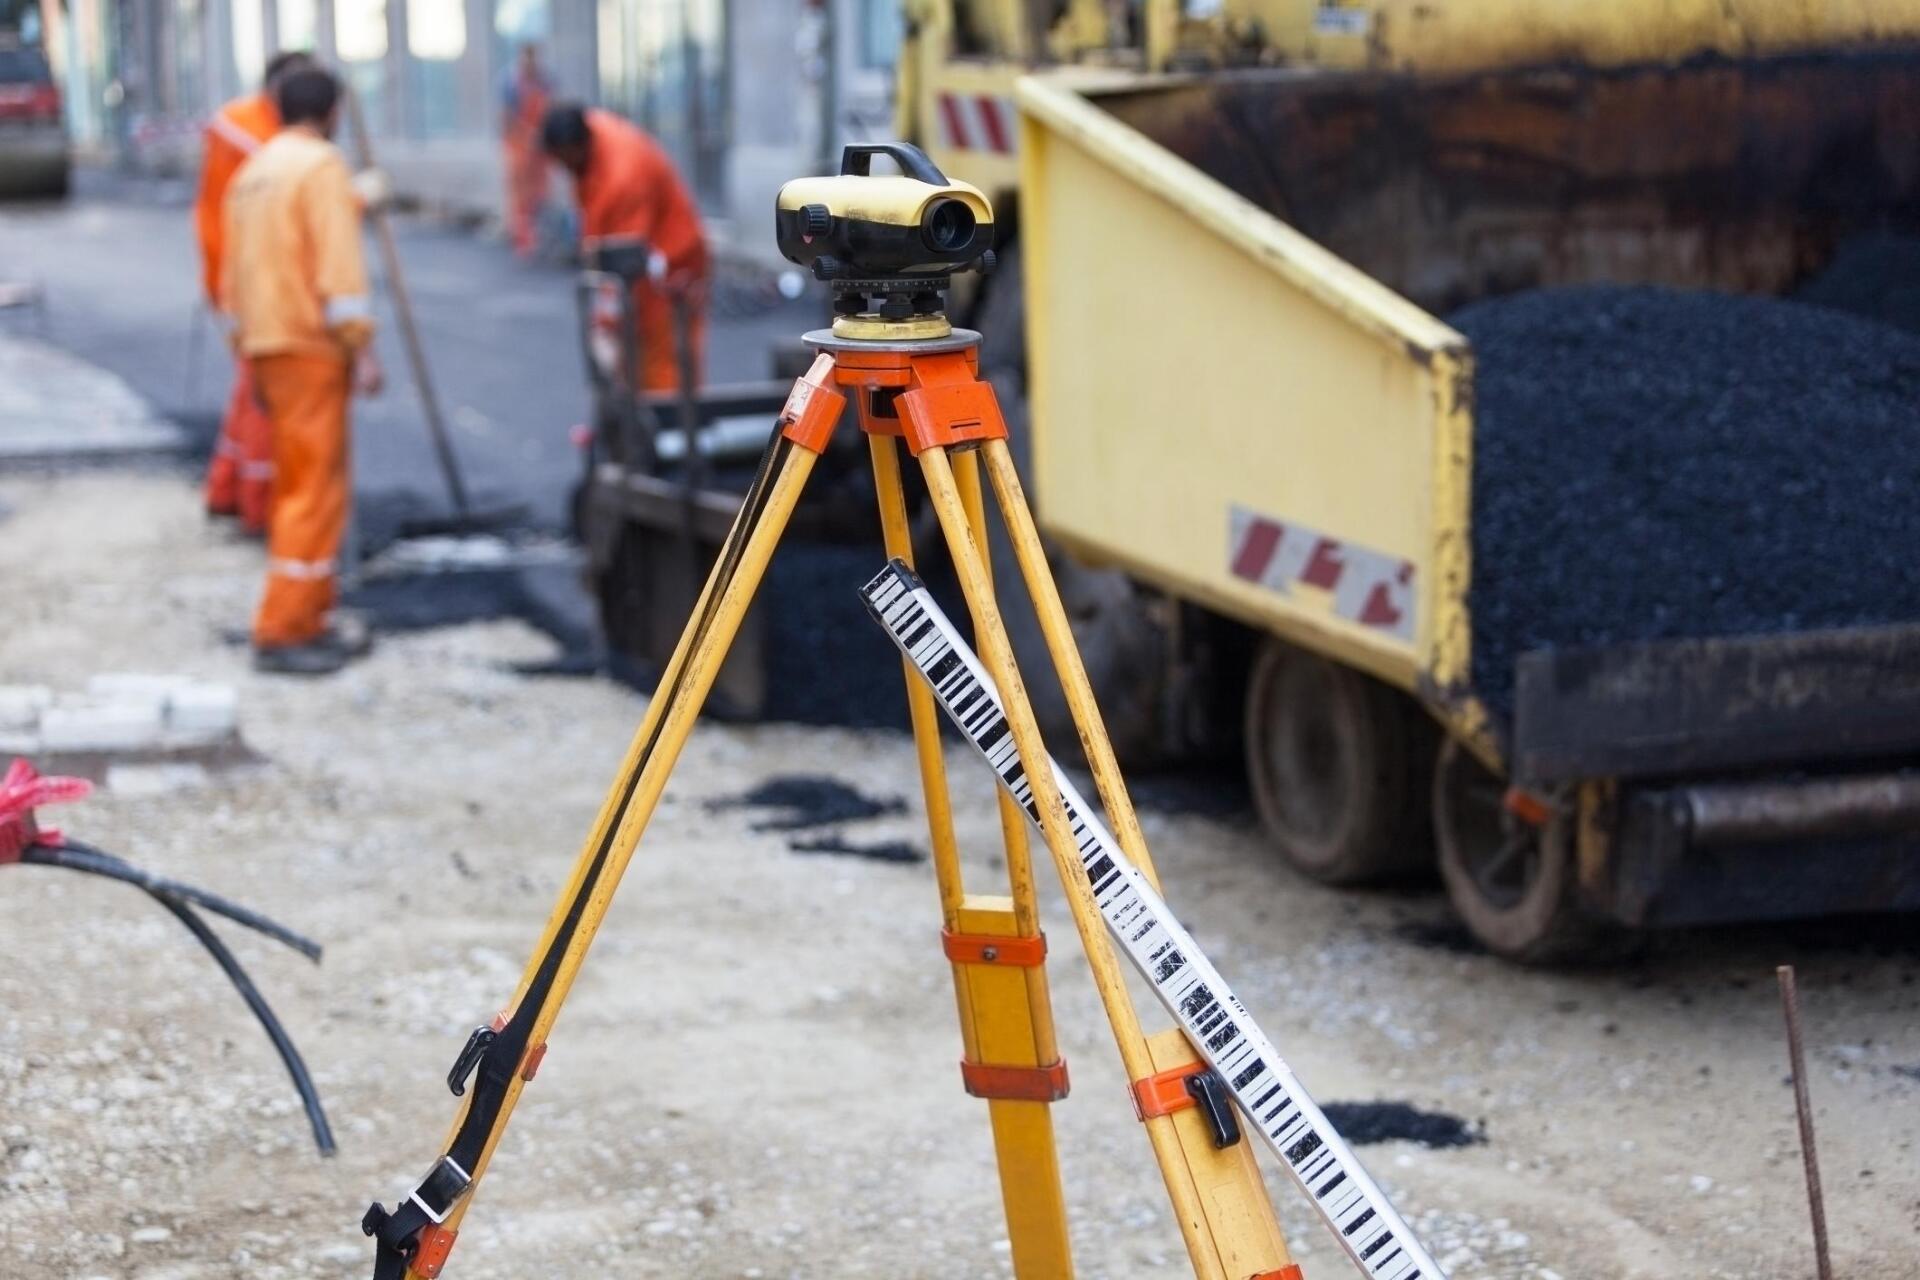 a surveyor's tool and workers